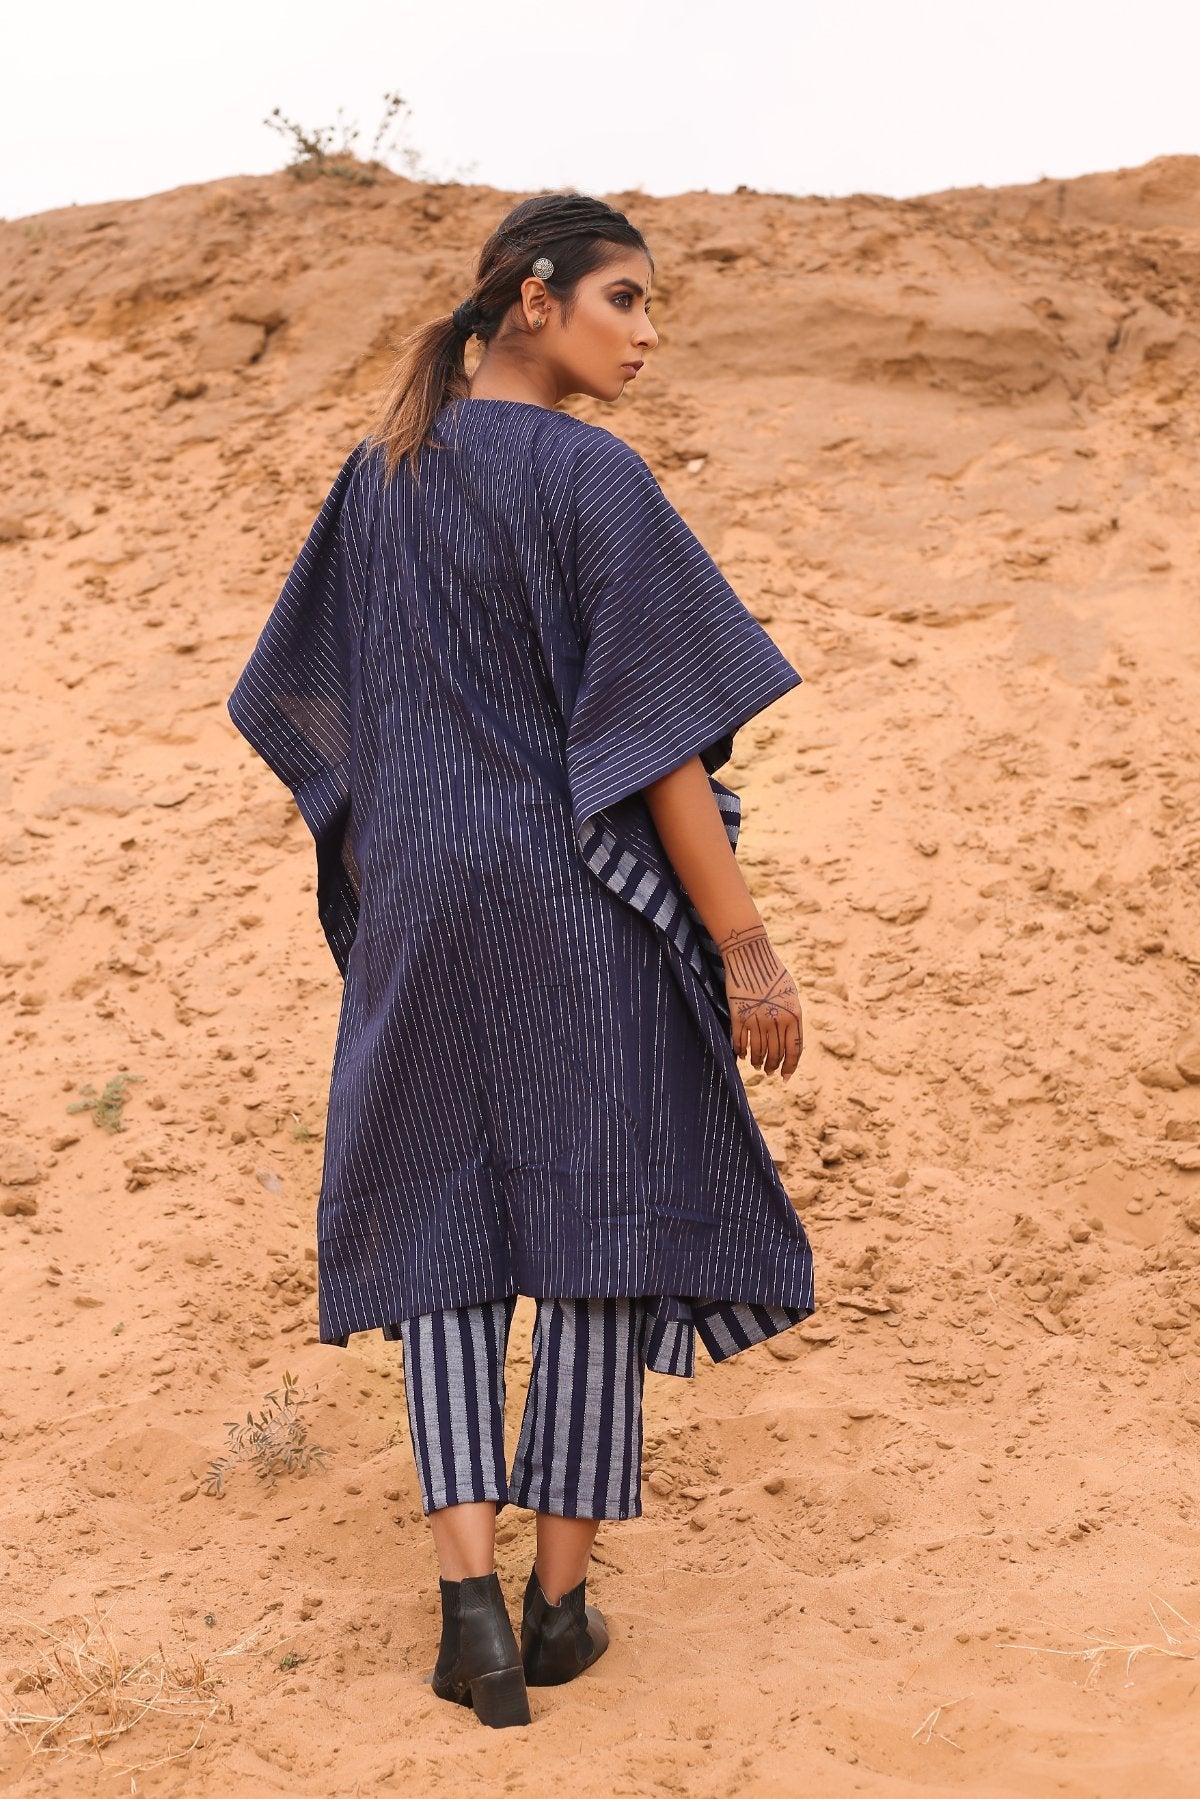 Kaftan With Deep Blue Striped Pants - Set Of Two at Kamakhyaa by Keva. This item is Blue, Co-ord Sets, Cotton, Cotton Lurex, Desert Rose, Natural, Relaxed Fit, Resort Wear, Stripes, Travel, Travel Co-ords, Womenswear